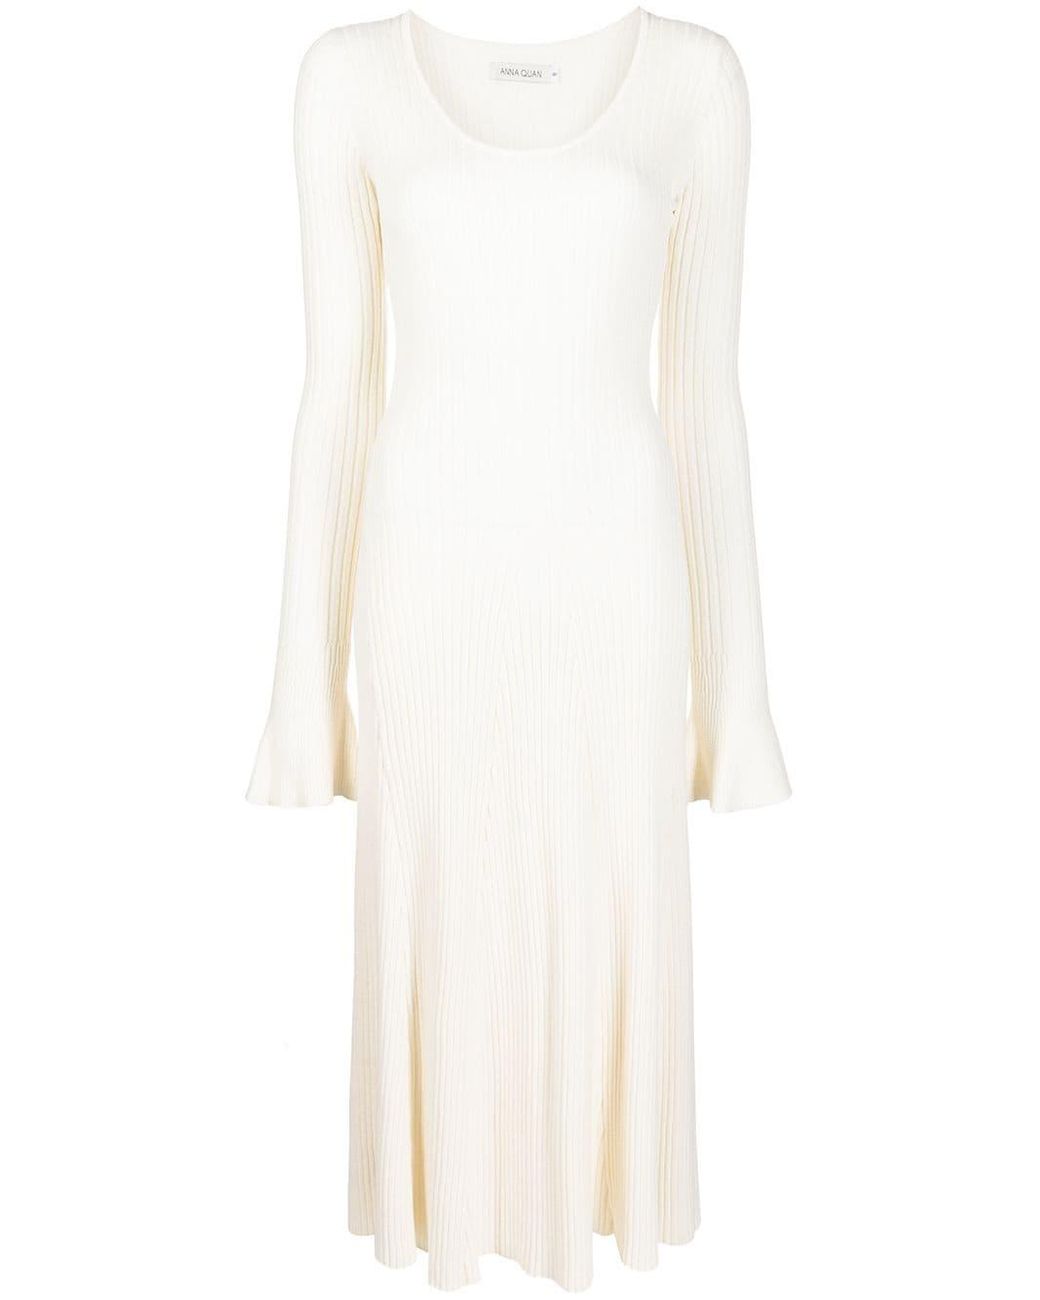 Anna Quan Ribbed Knit Dress in White | Lyst